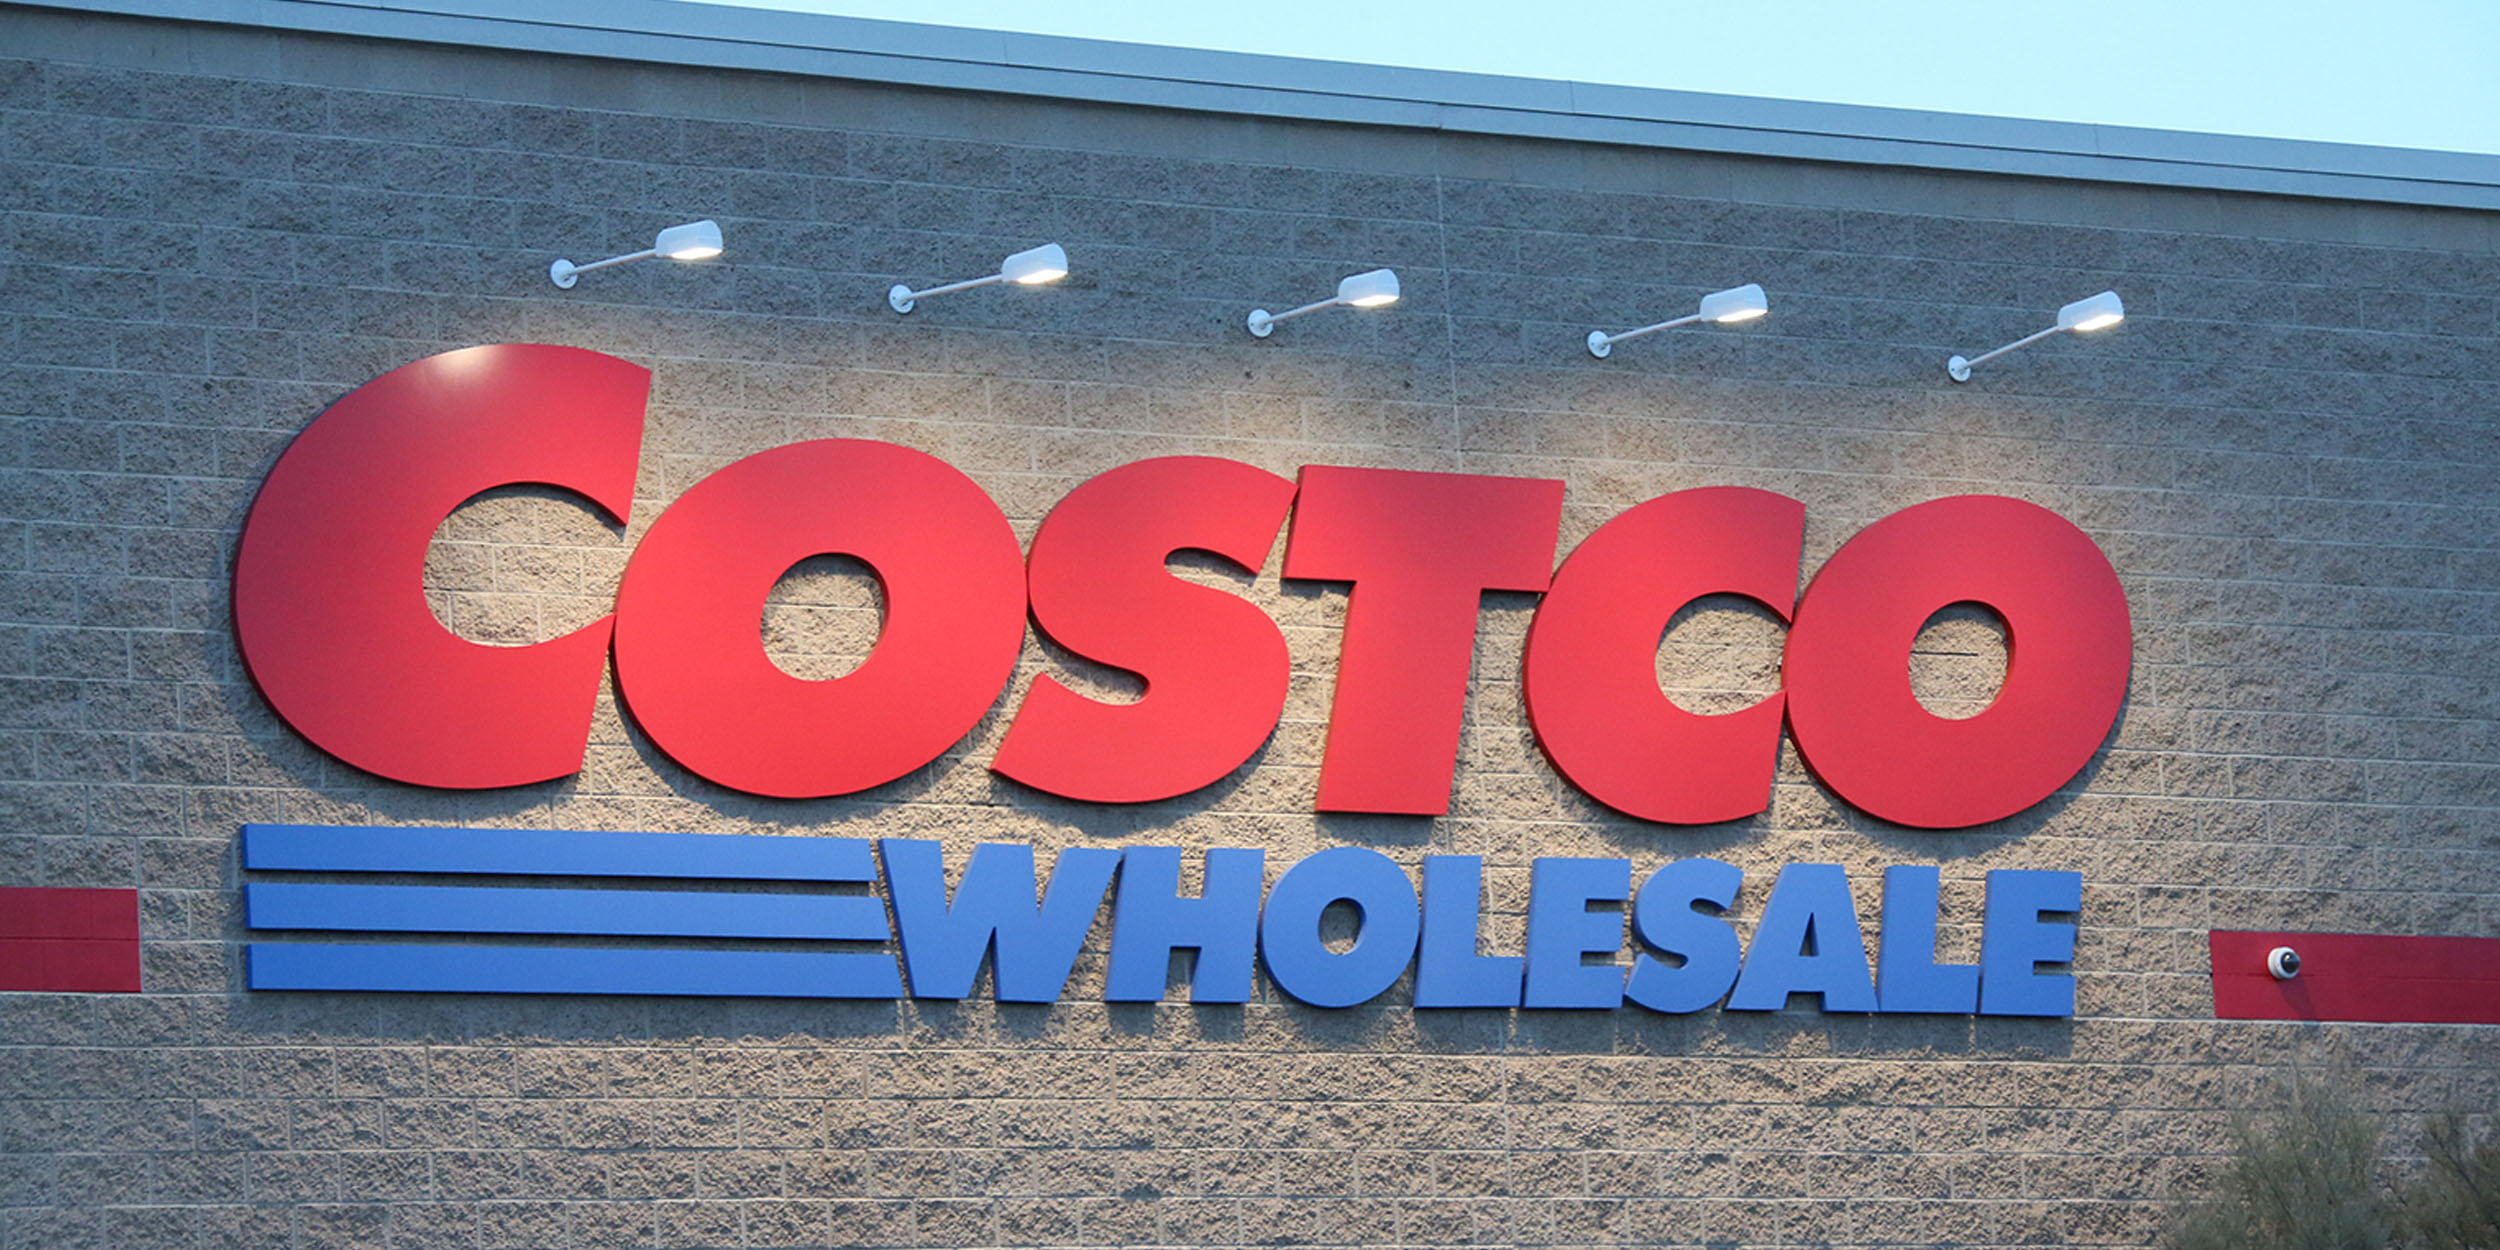 Costco Travel: The Ultimate Hack for Incredible Vacation Deals